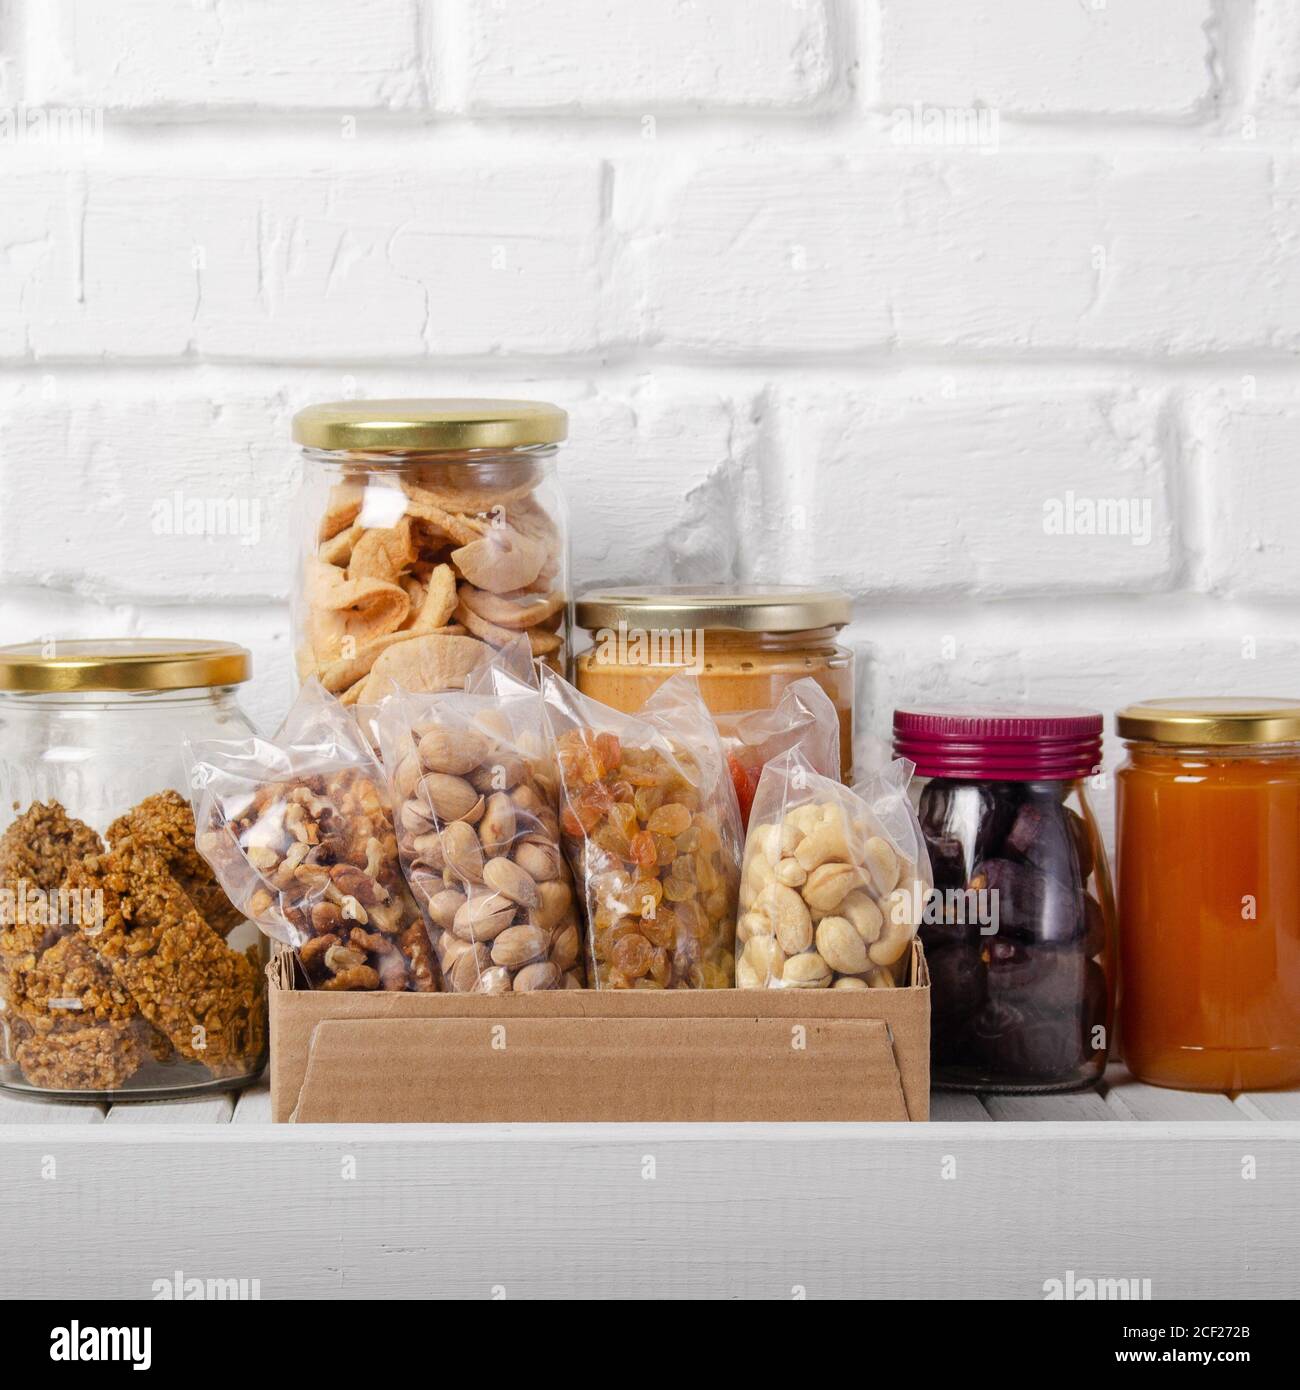 Set of long storage term mostly dry sweet energy foods on pantry shelf on brick wall background. Stock Photo